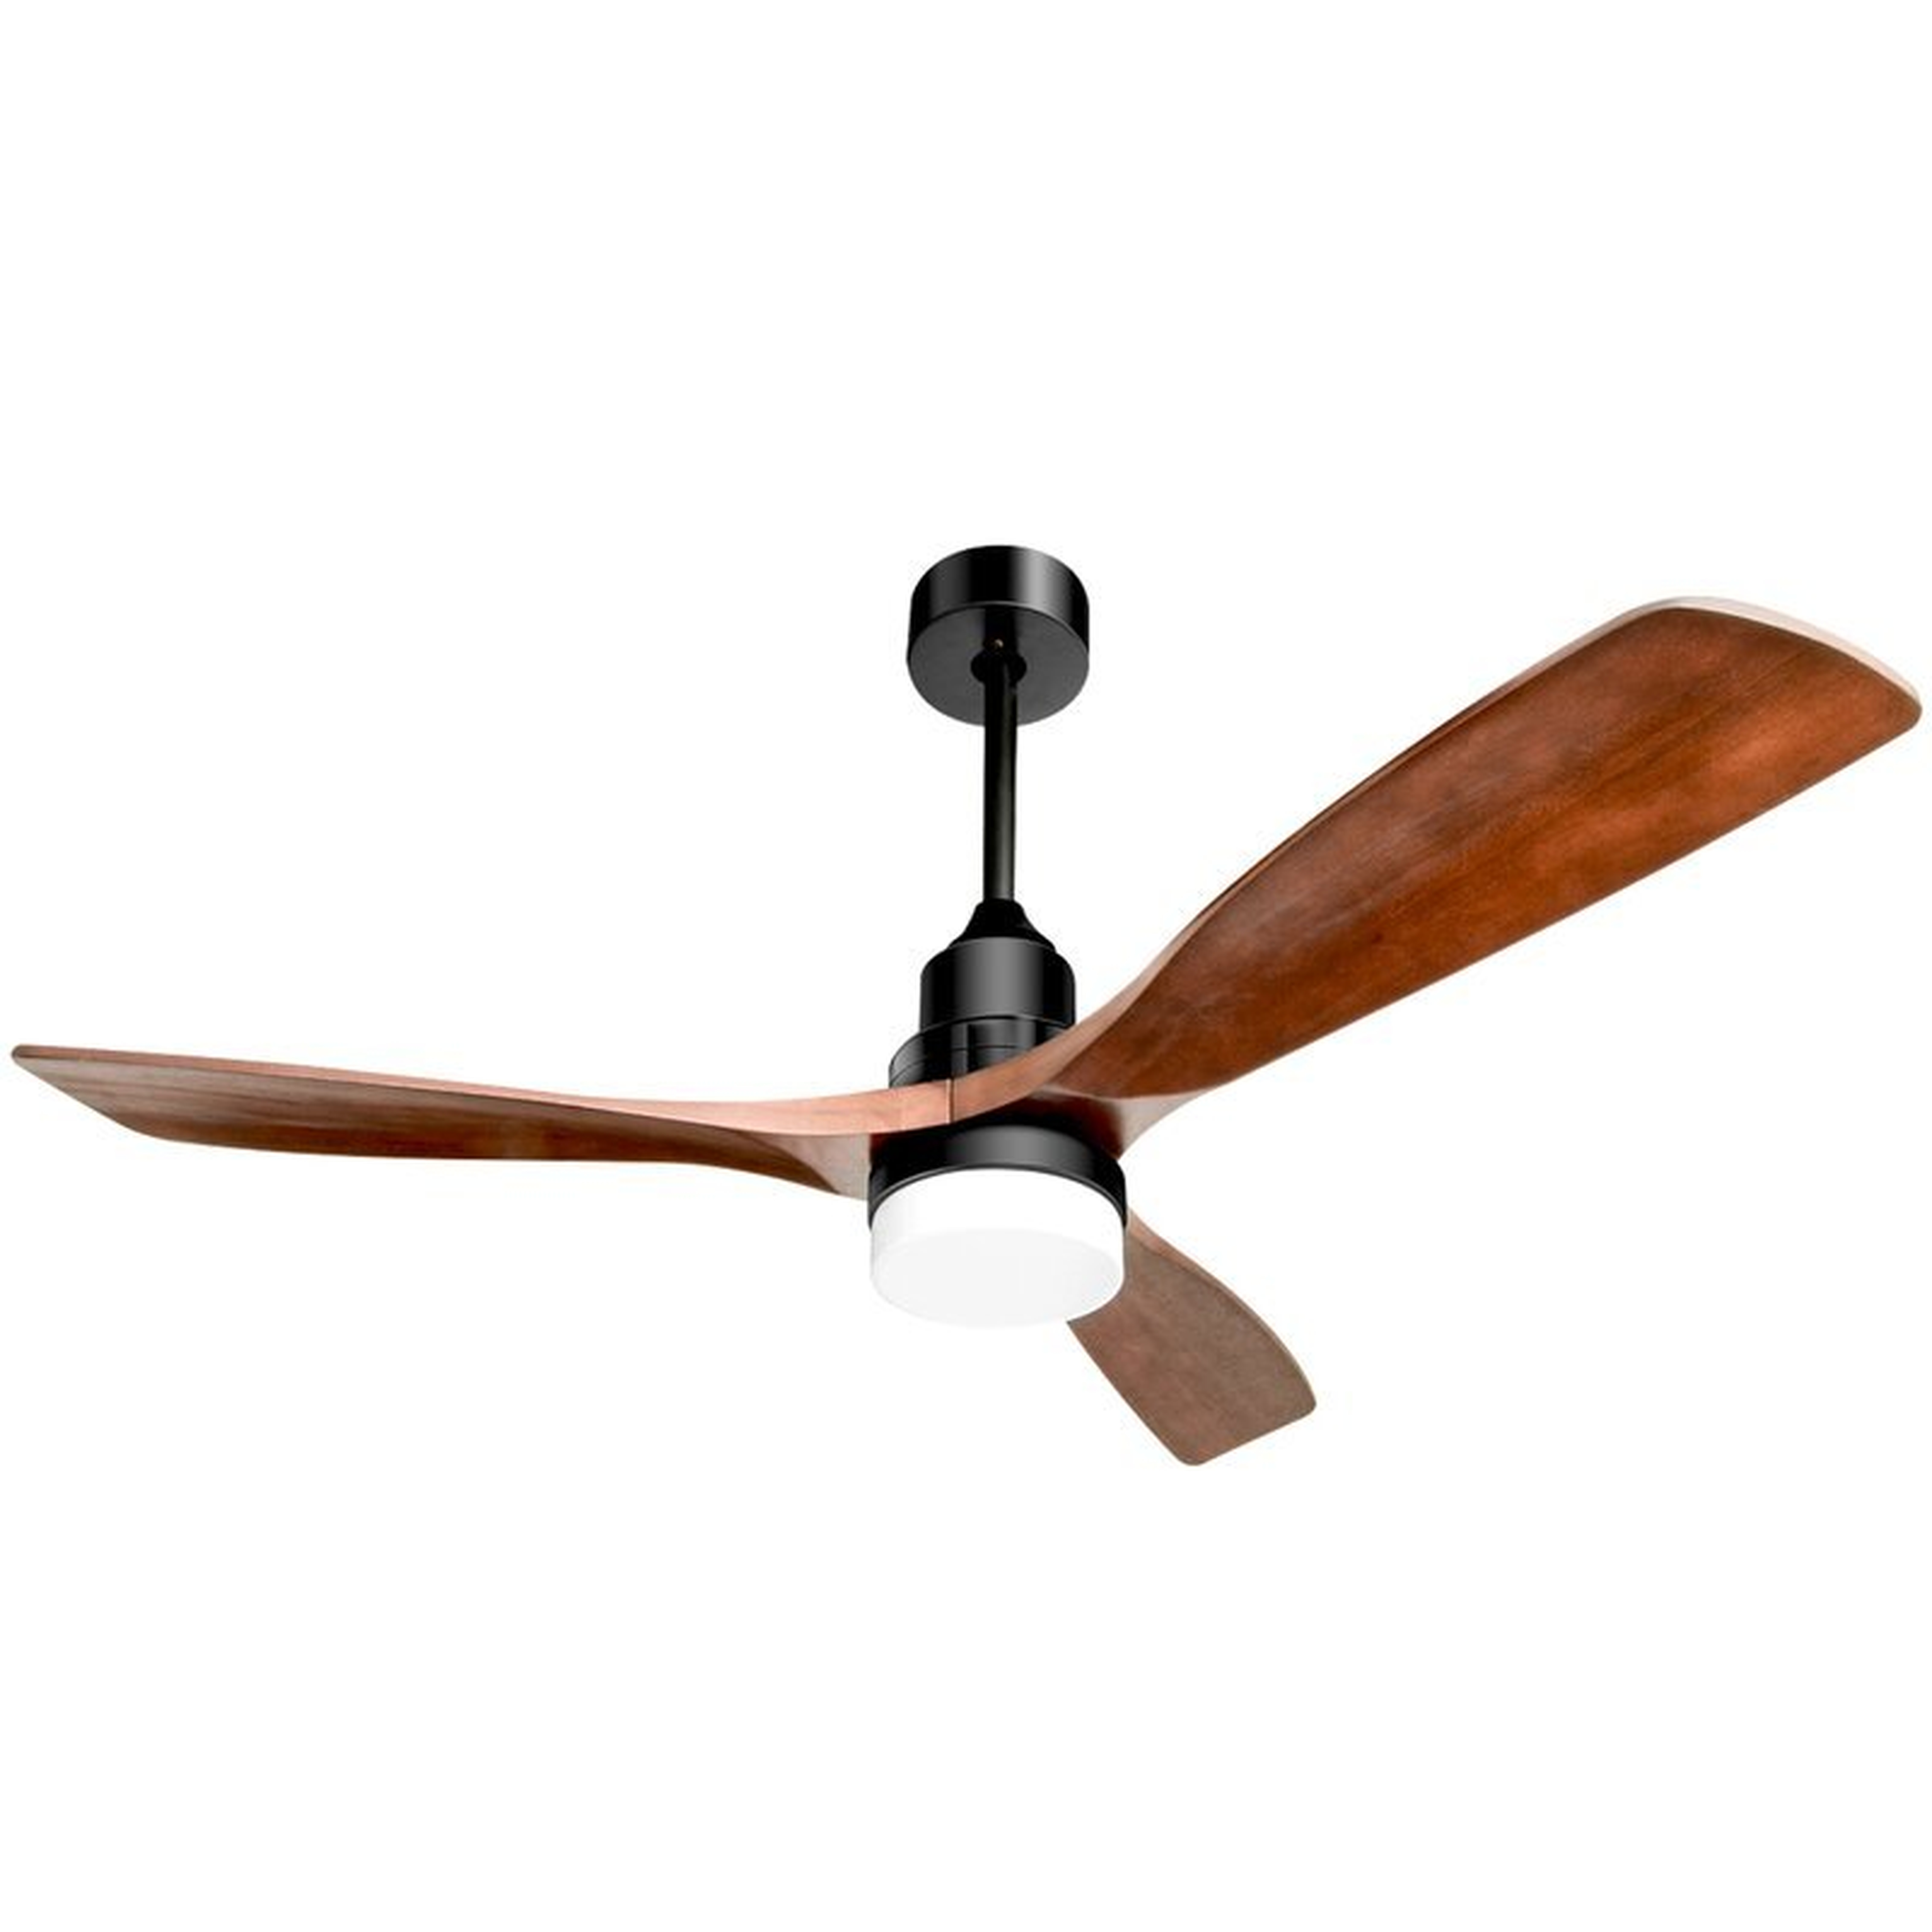 52'' Nicola 3 - Blade LED Standard Ceiling Fan with Remote Control and Light Kit Included - Wayfair